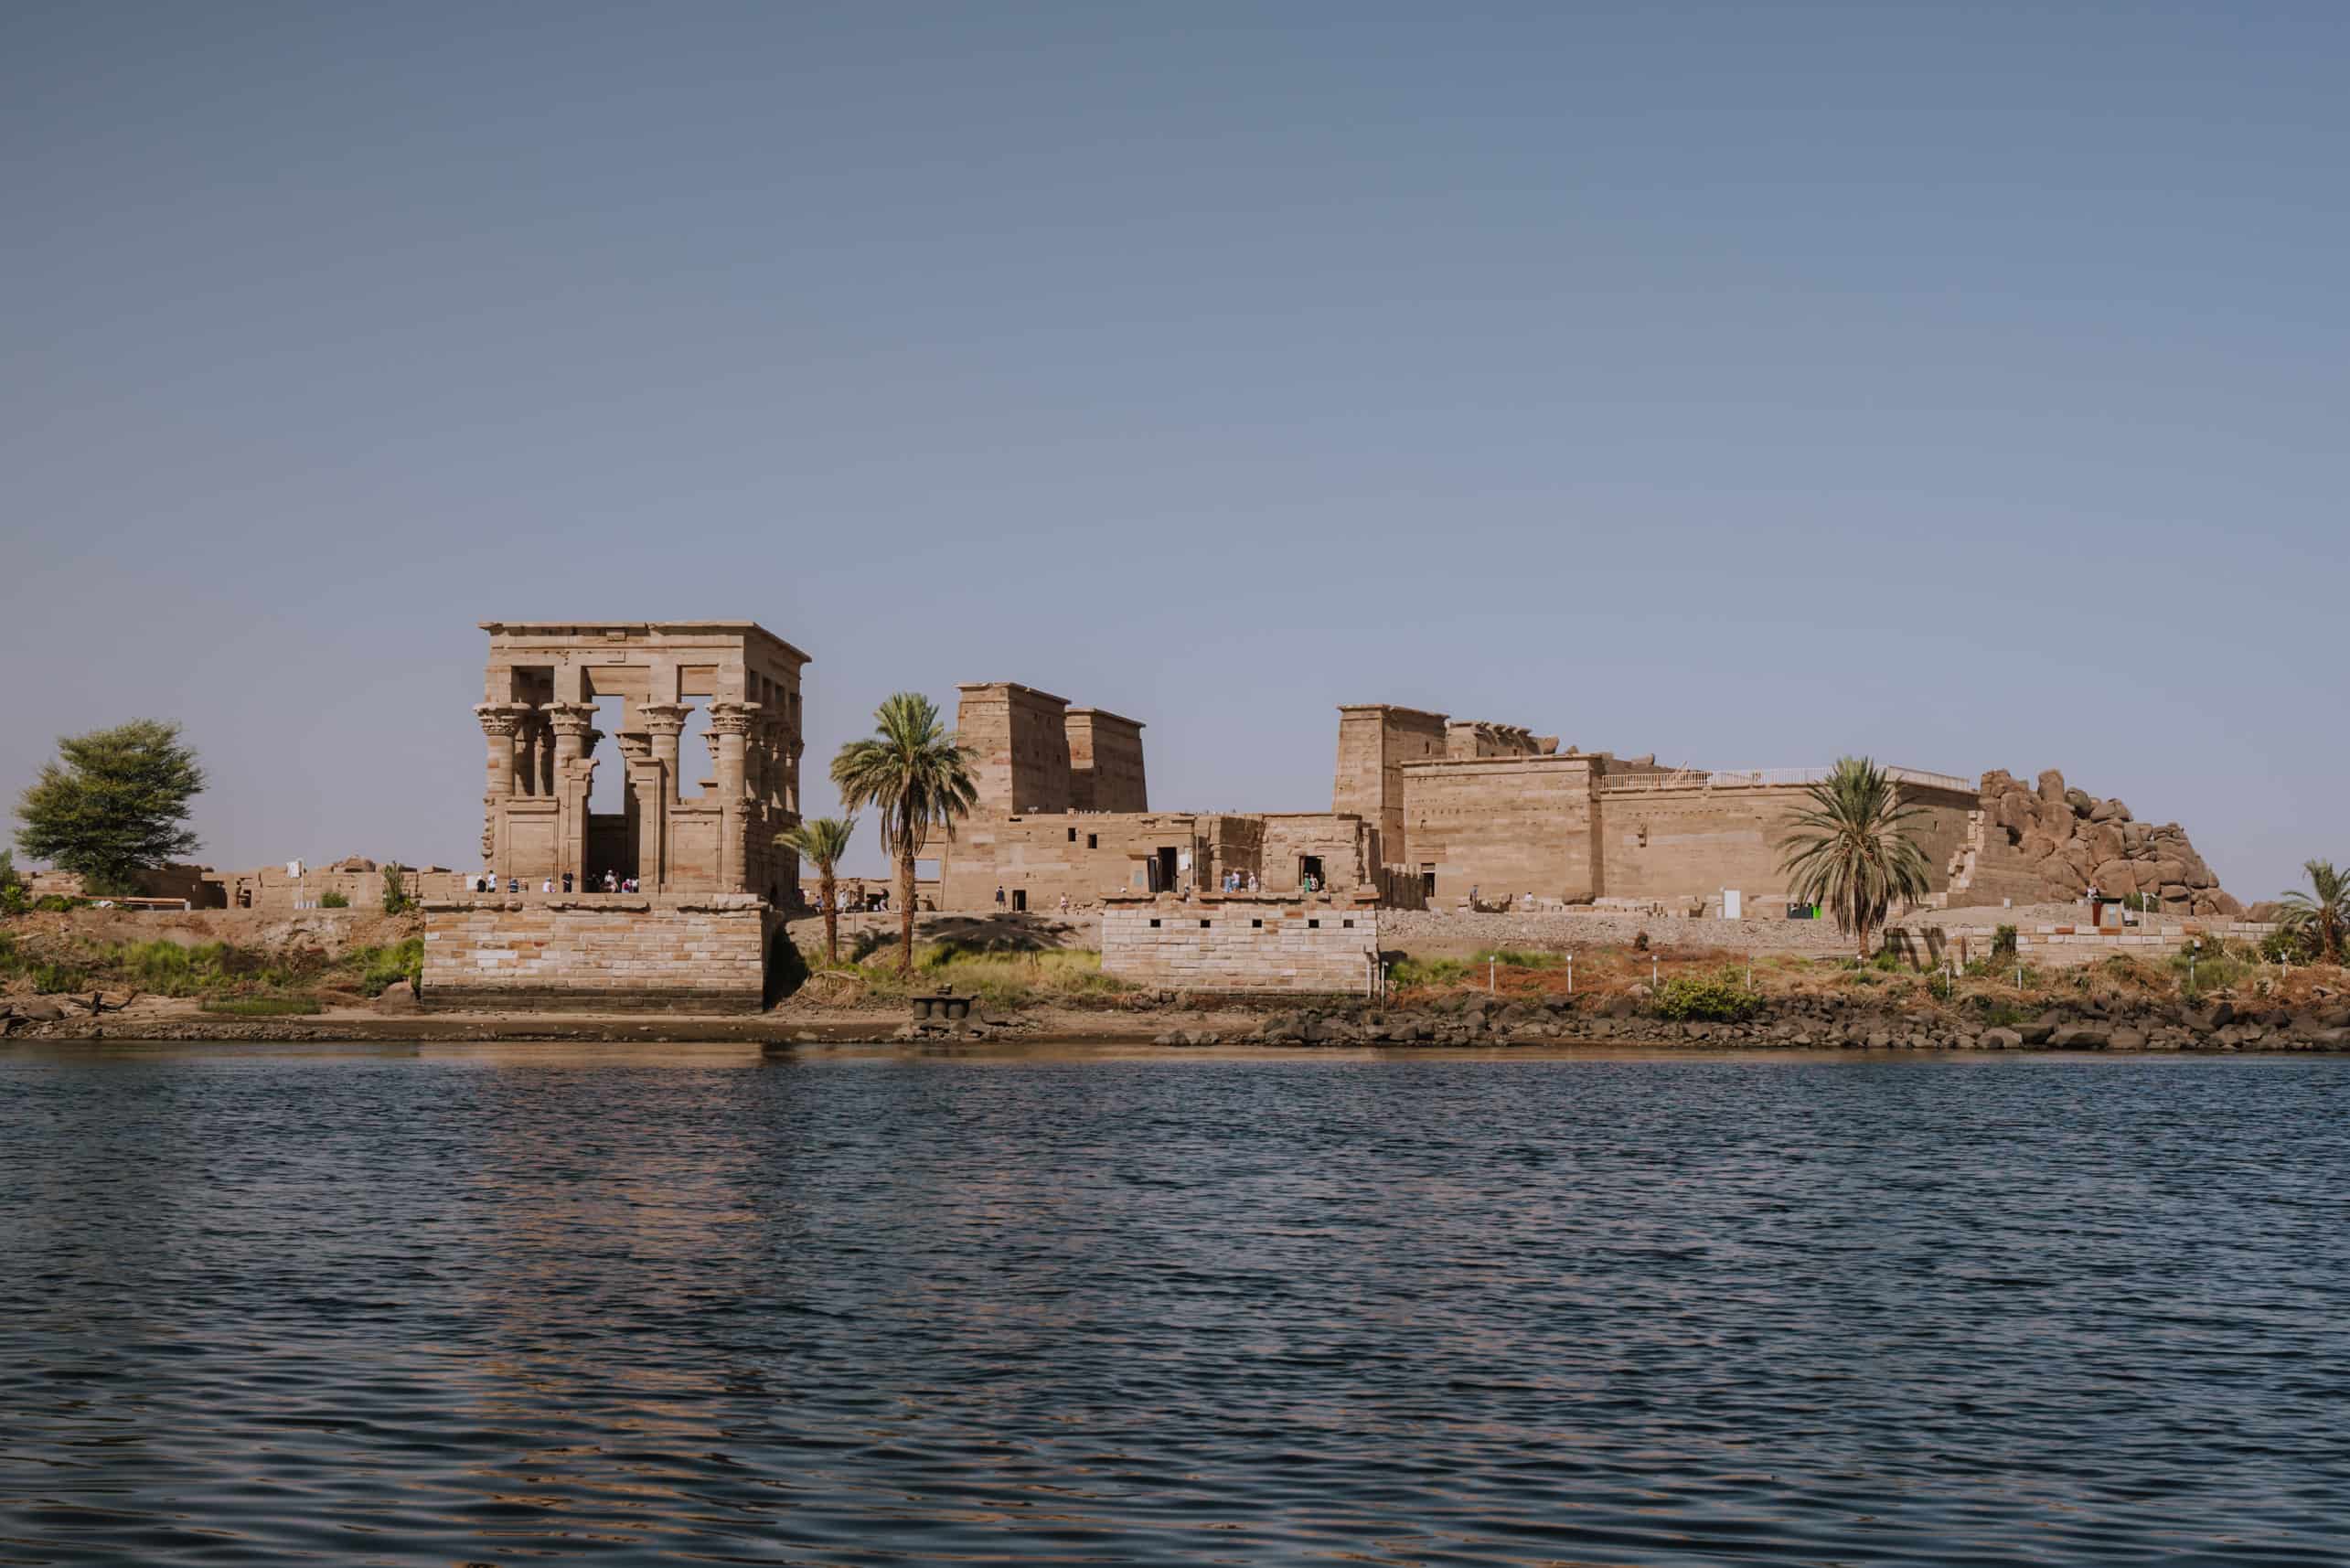 Egyptian ruins seen from the water during an Egypt itinerary.